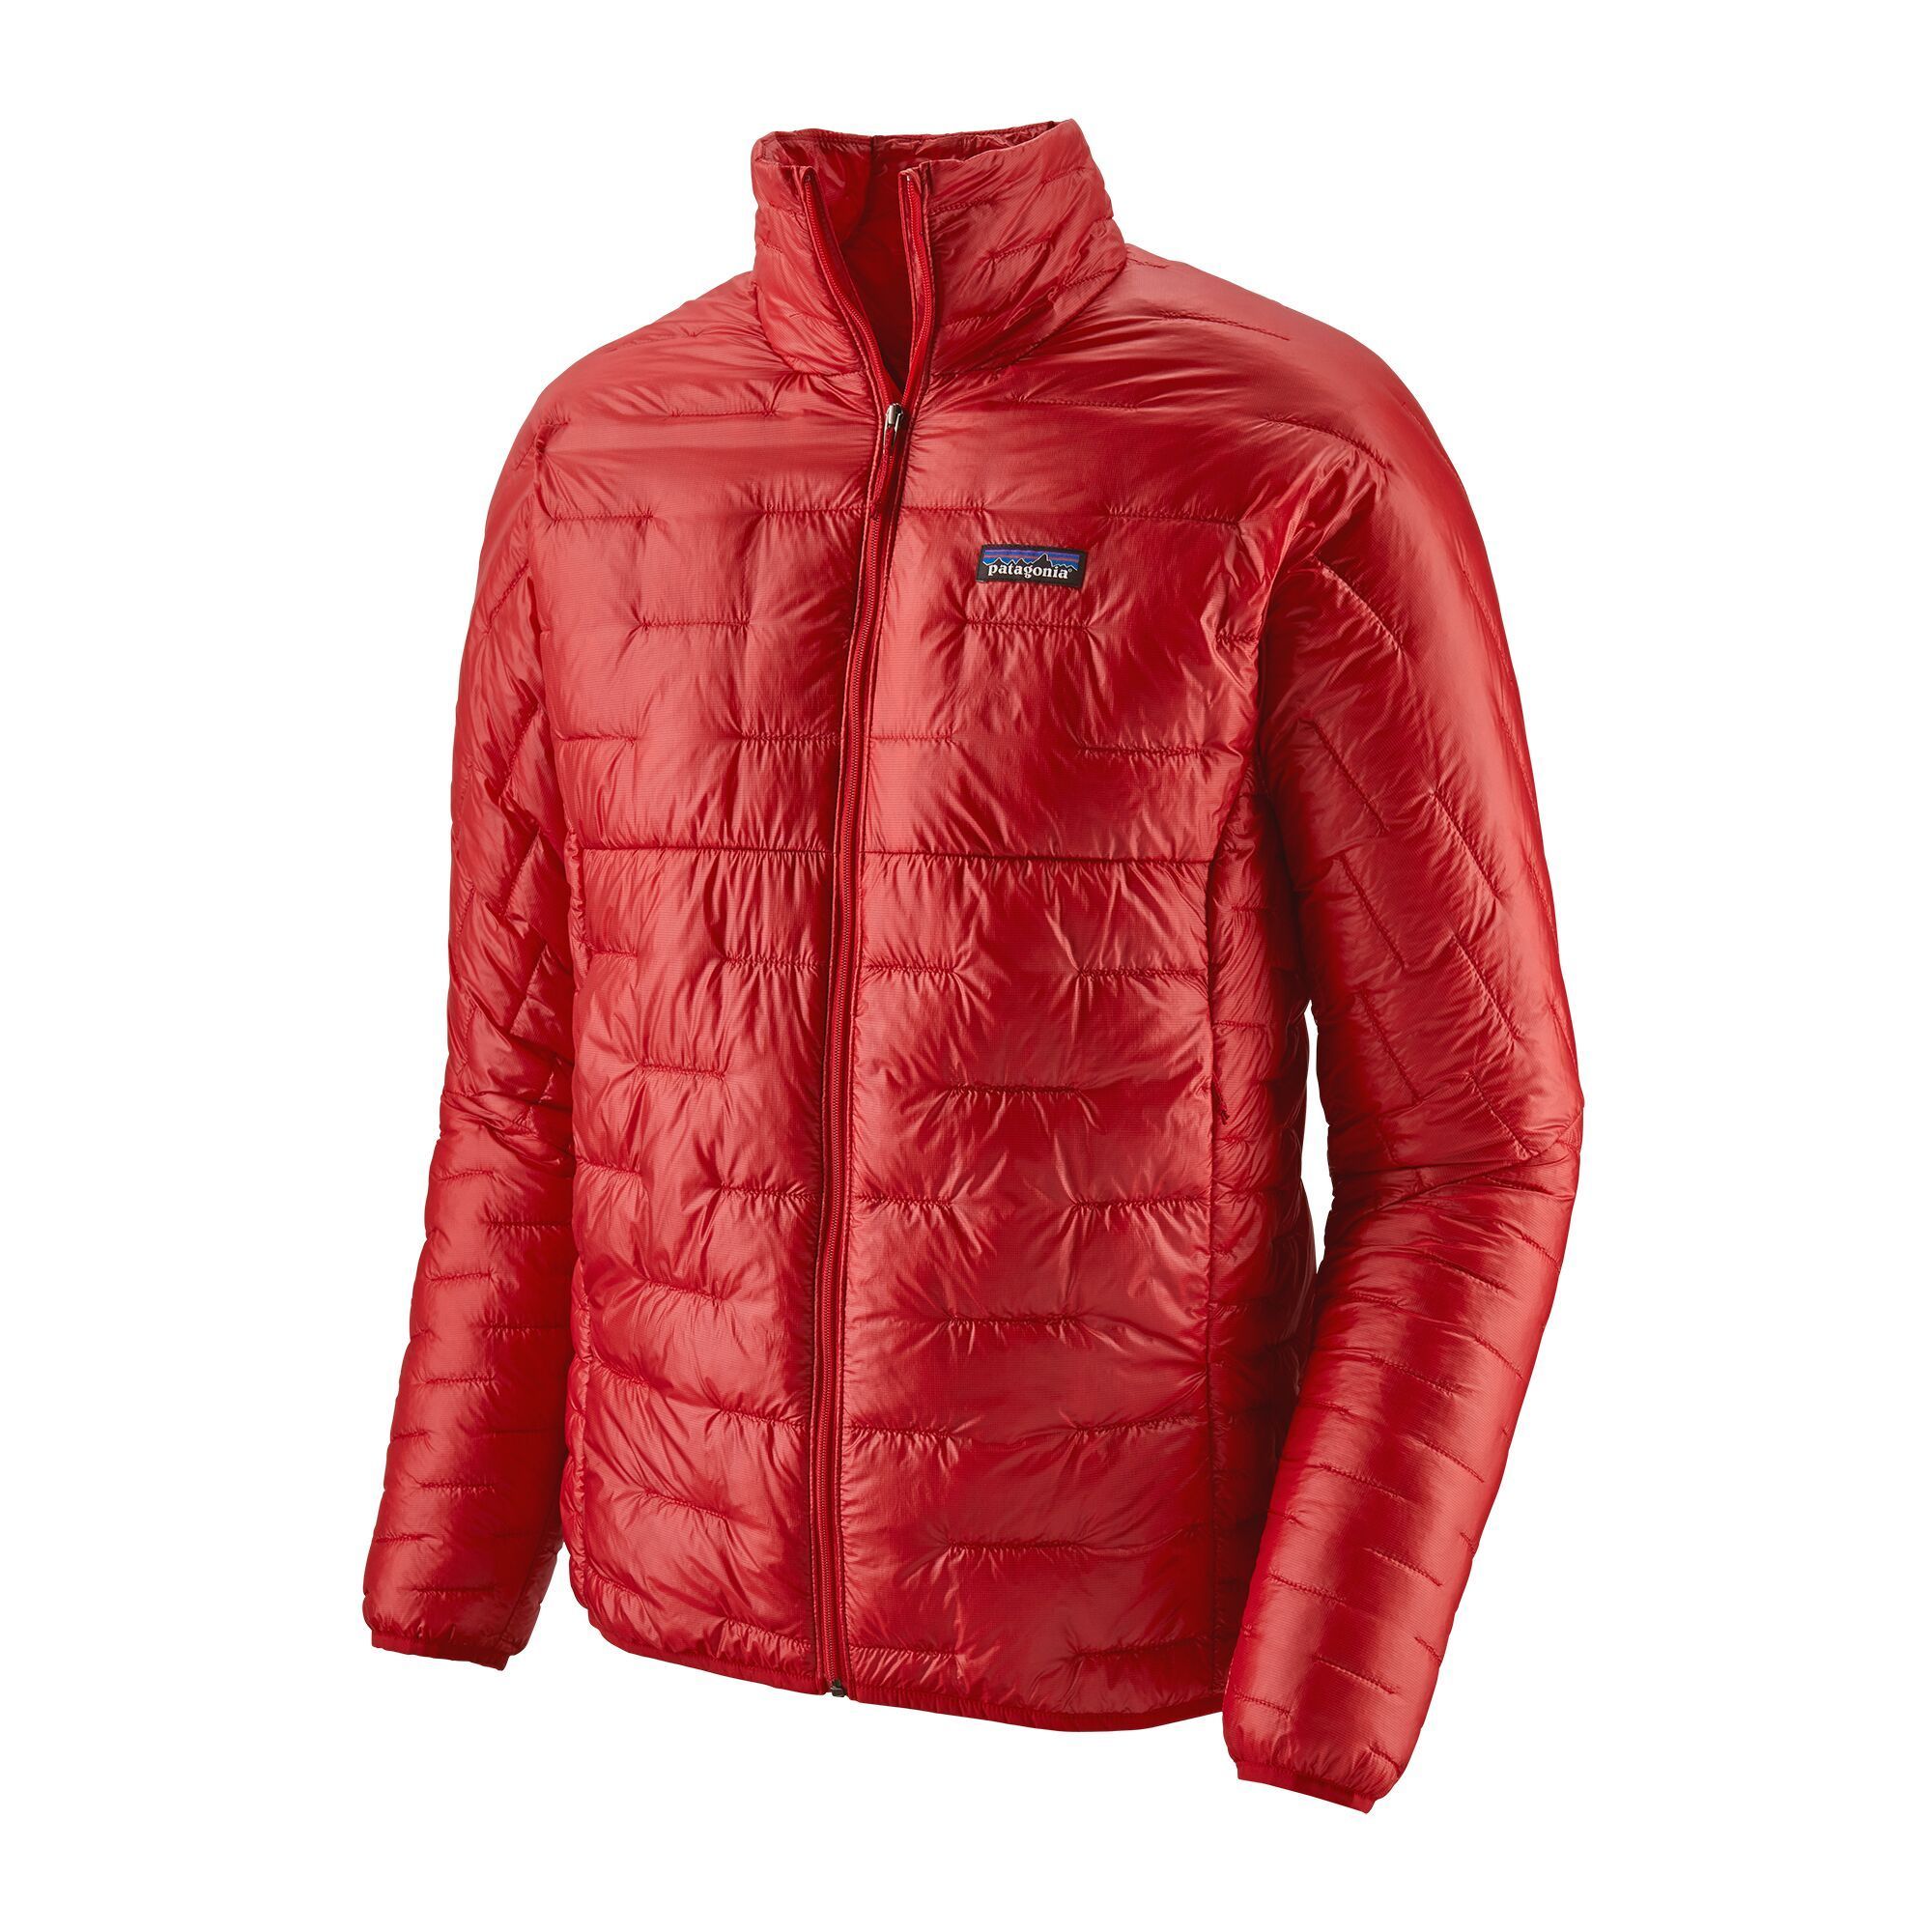 Patagonia Men's Micro Puff® Jacket - Fair Trade Certified sewn, Fire / S